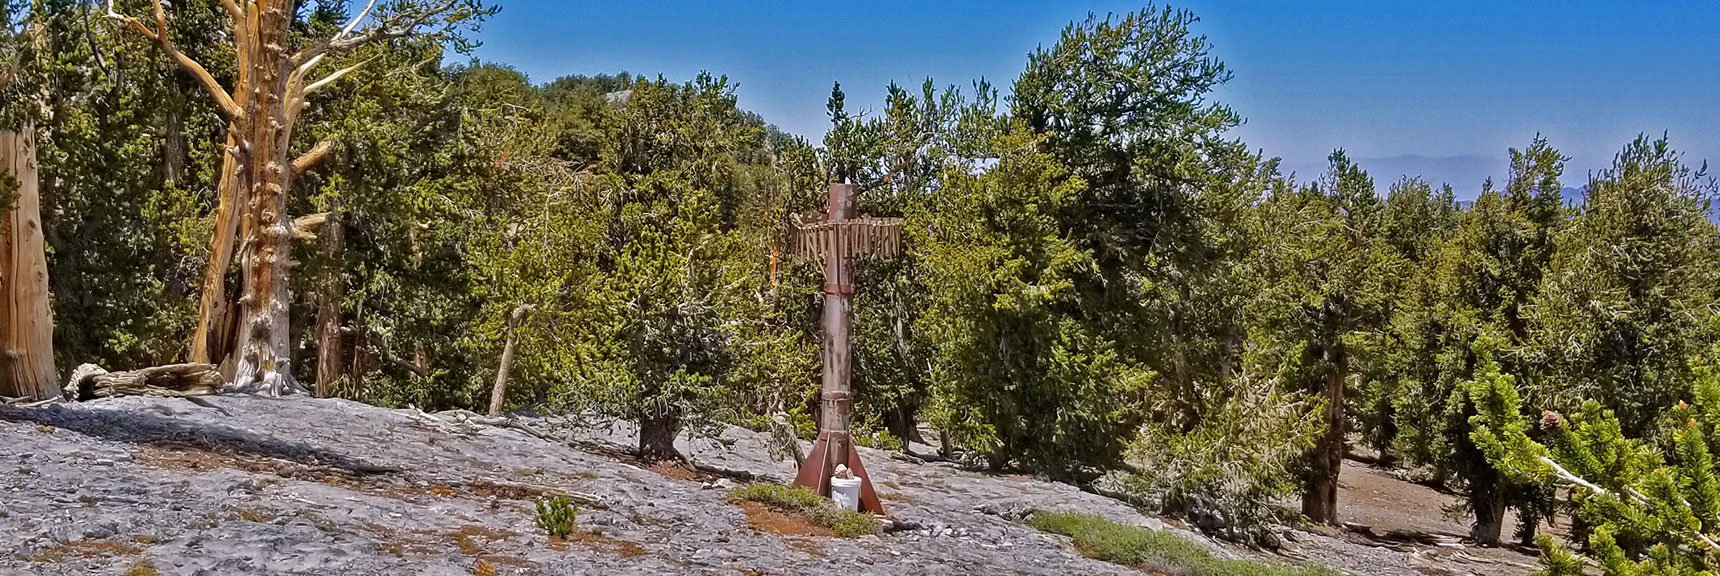 Weather Station on Lee/Kyle Canyon High Ridgeline Marks Point to Descend Left to North Loop Trail | Lee to Kyle Canyon | Foxtail Approach | Mt Charleston Wilderness | Spring Mountains, Nevada